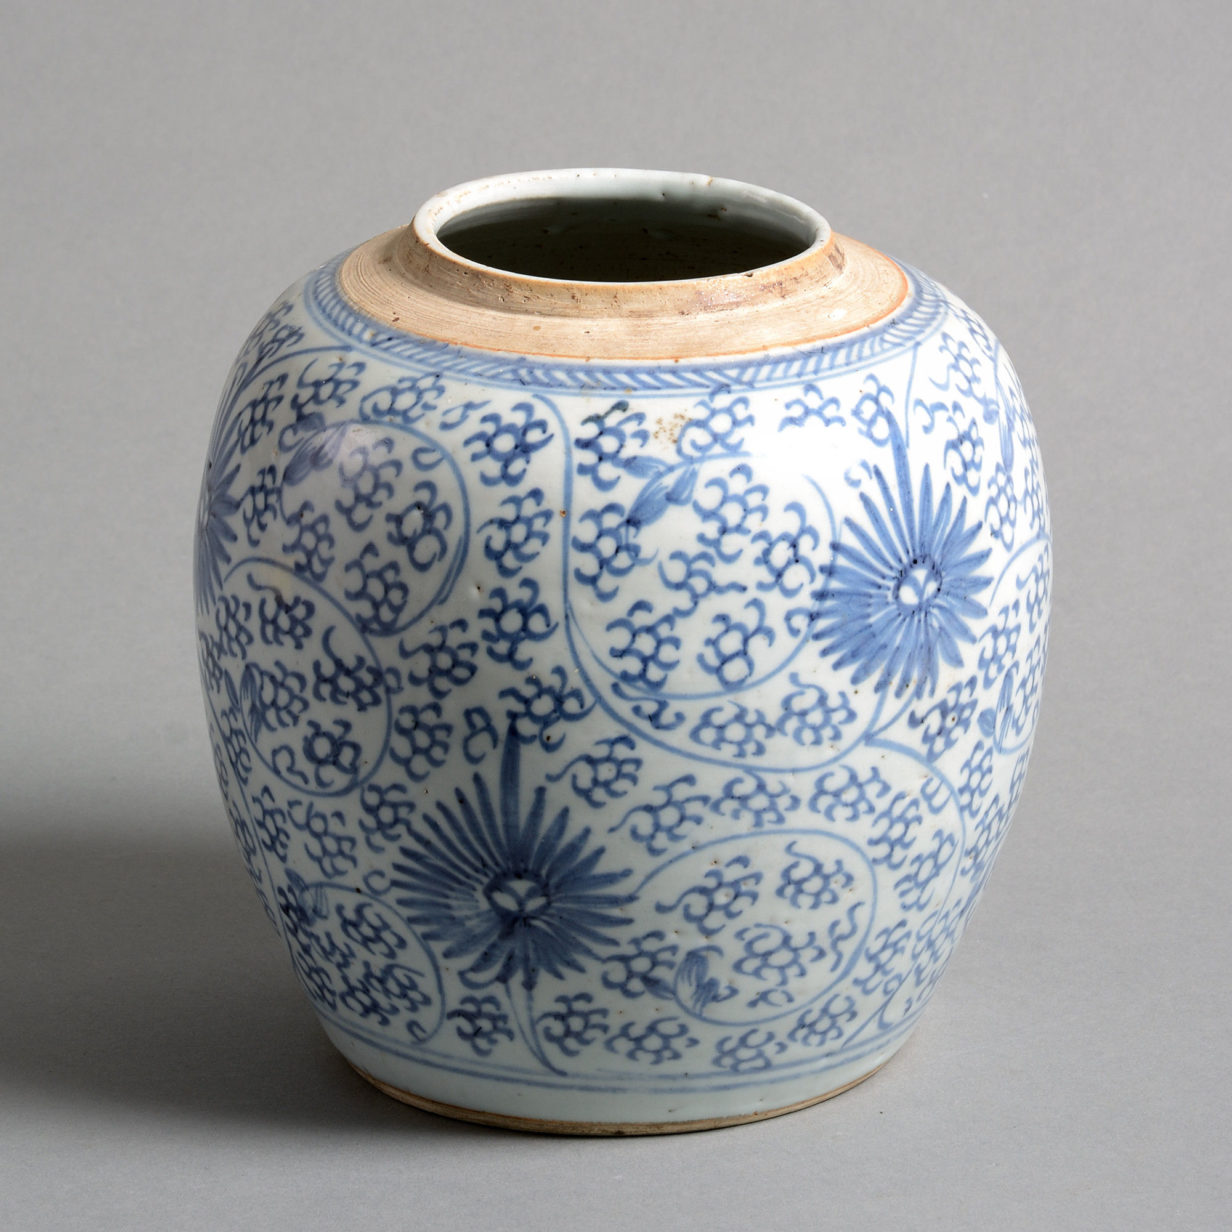 A Late 18th Century Qing Dynasty Blue & White Porcelain Jar